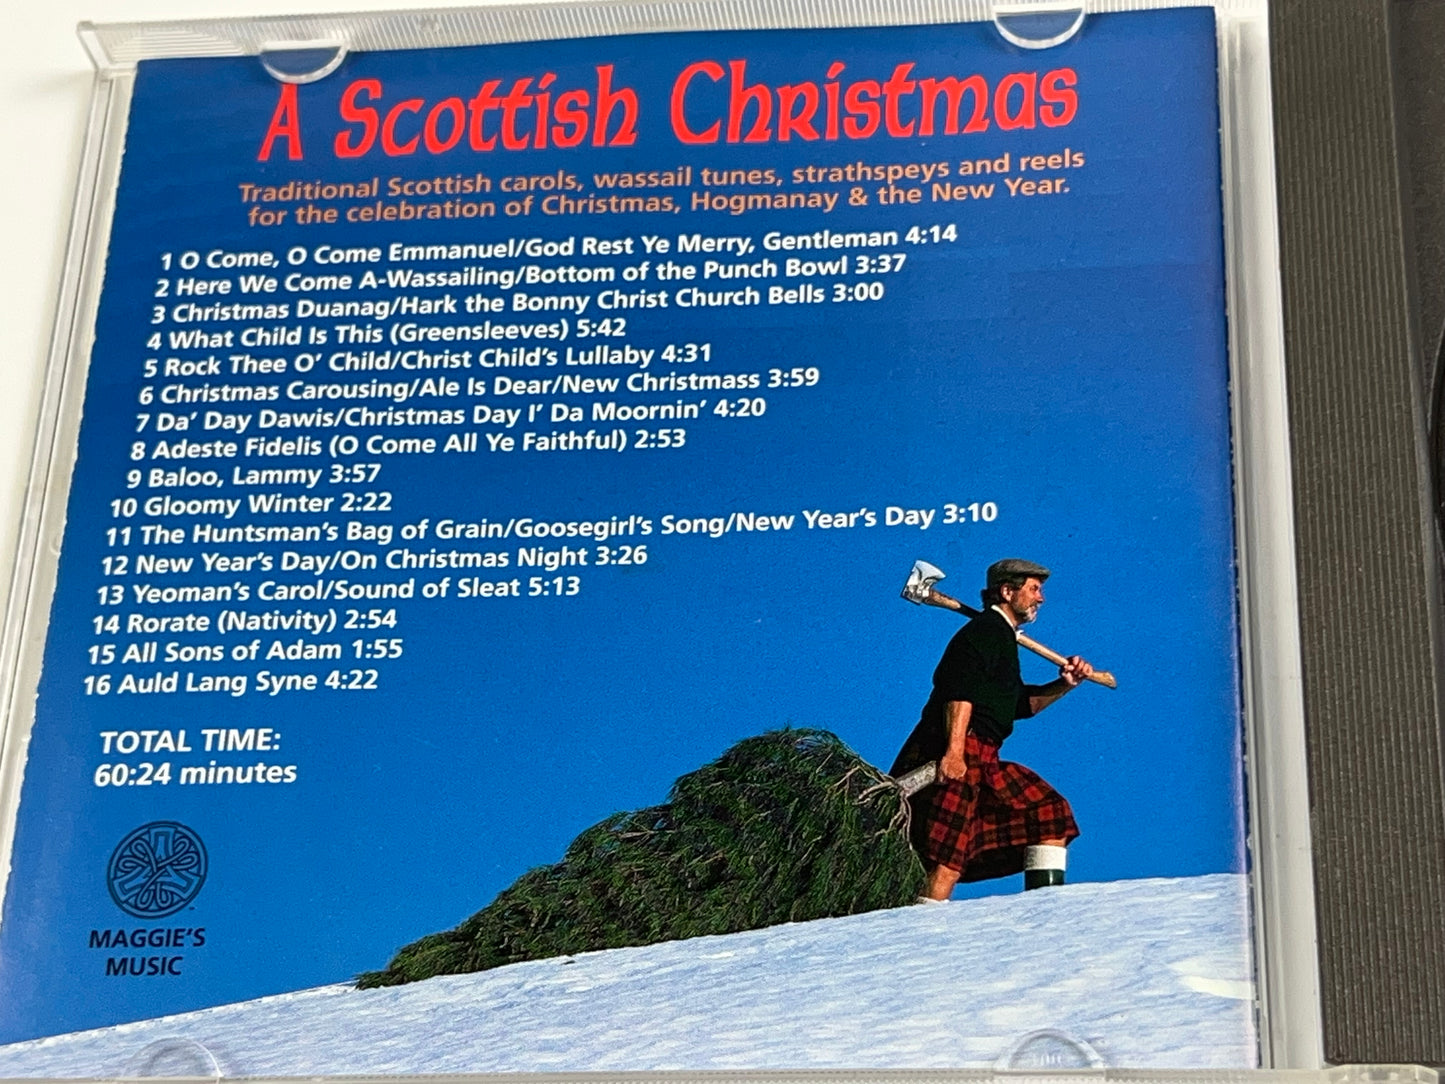 A Scottish Christmas - Audio CD By Bonnie Rideout